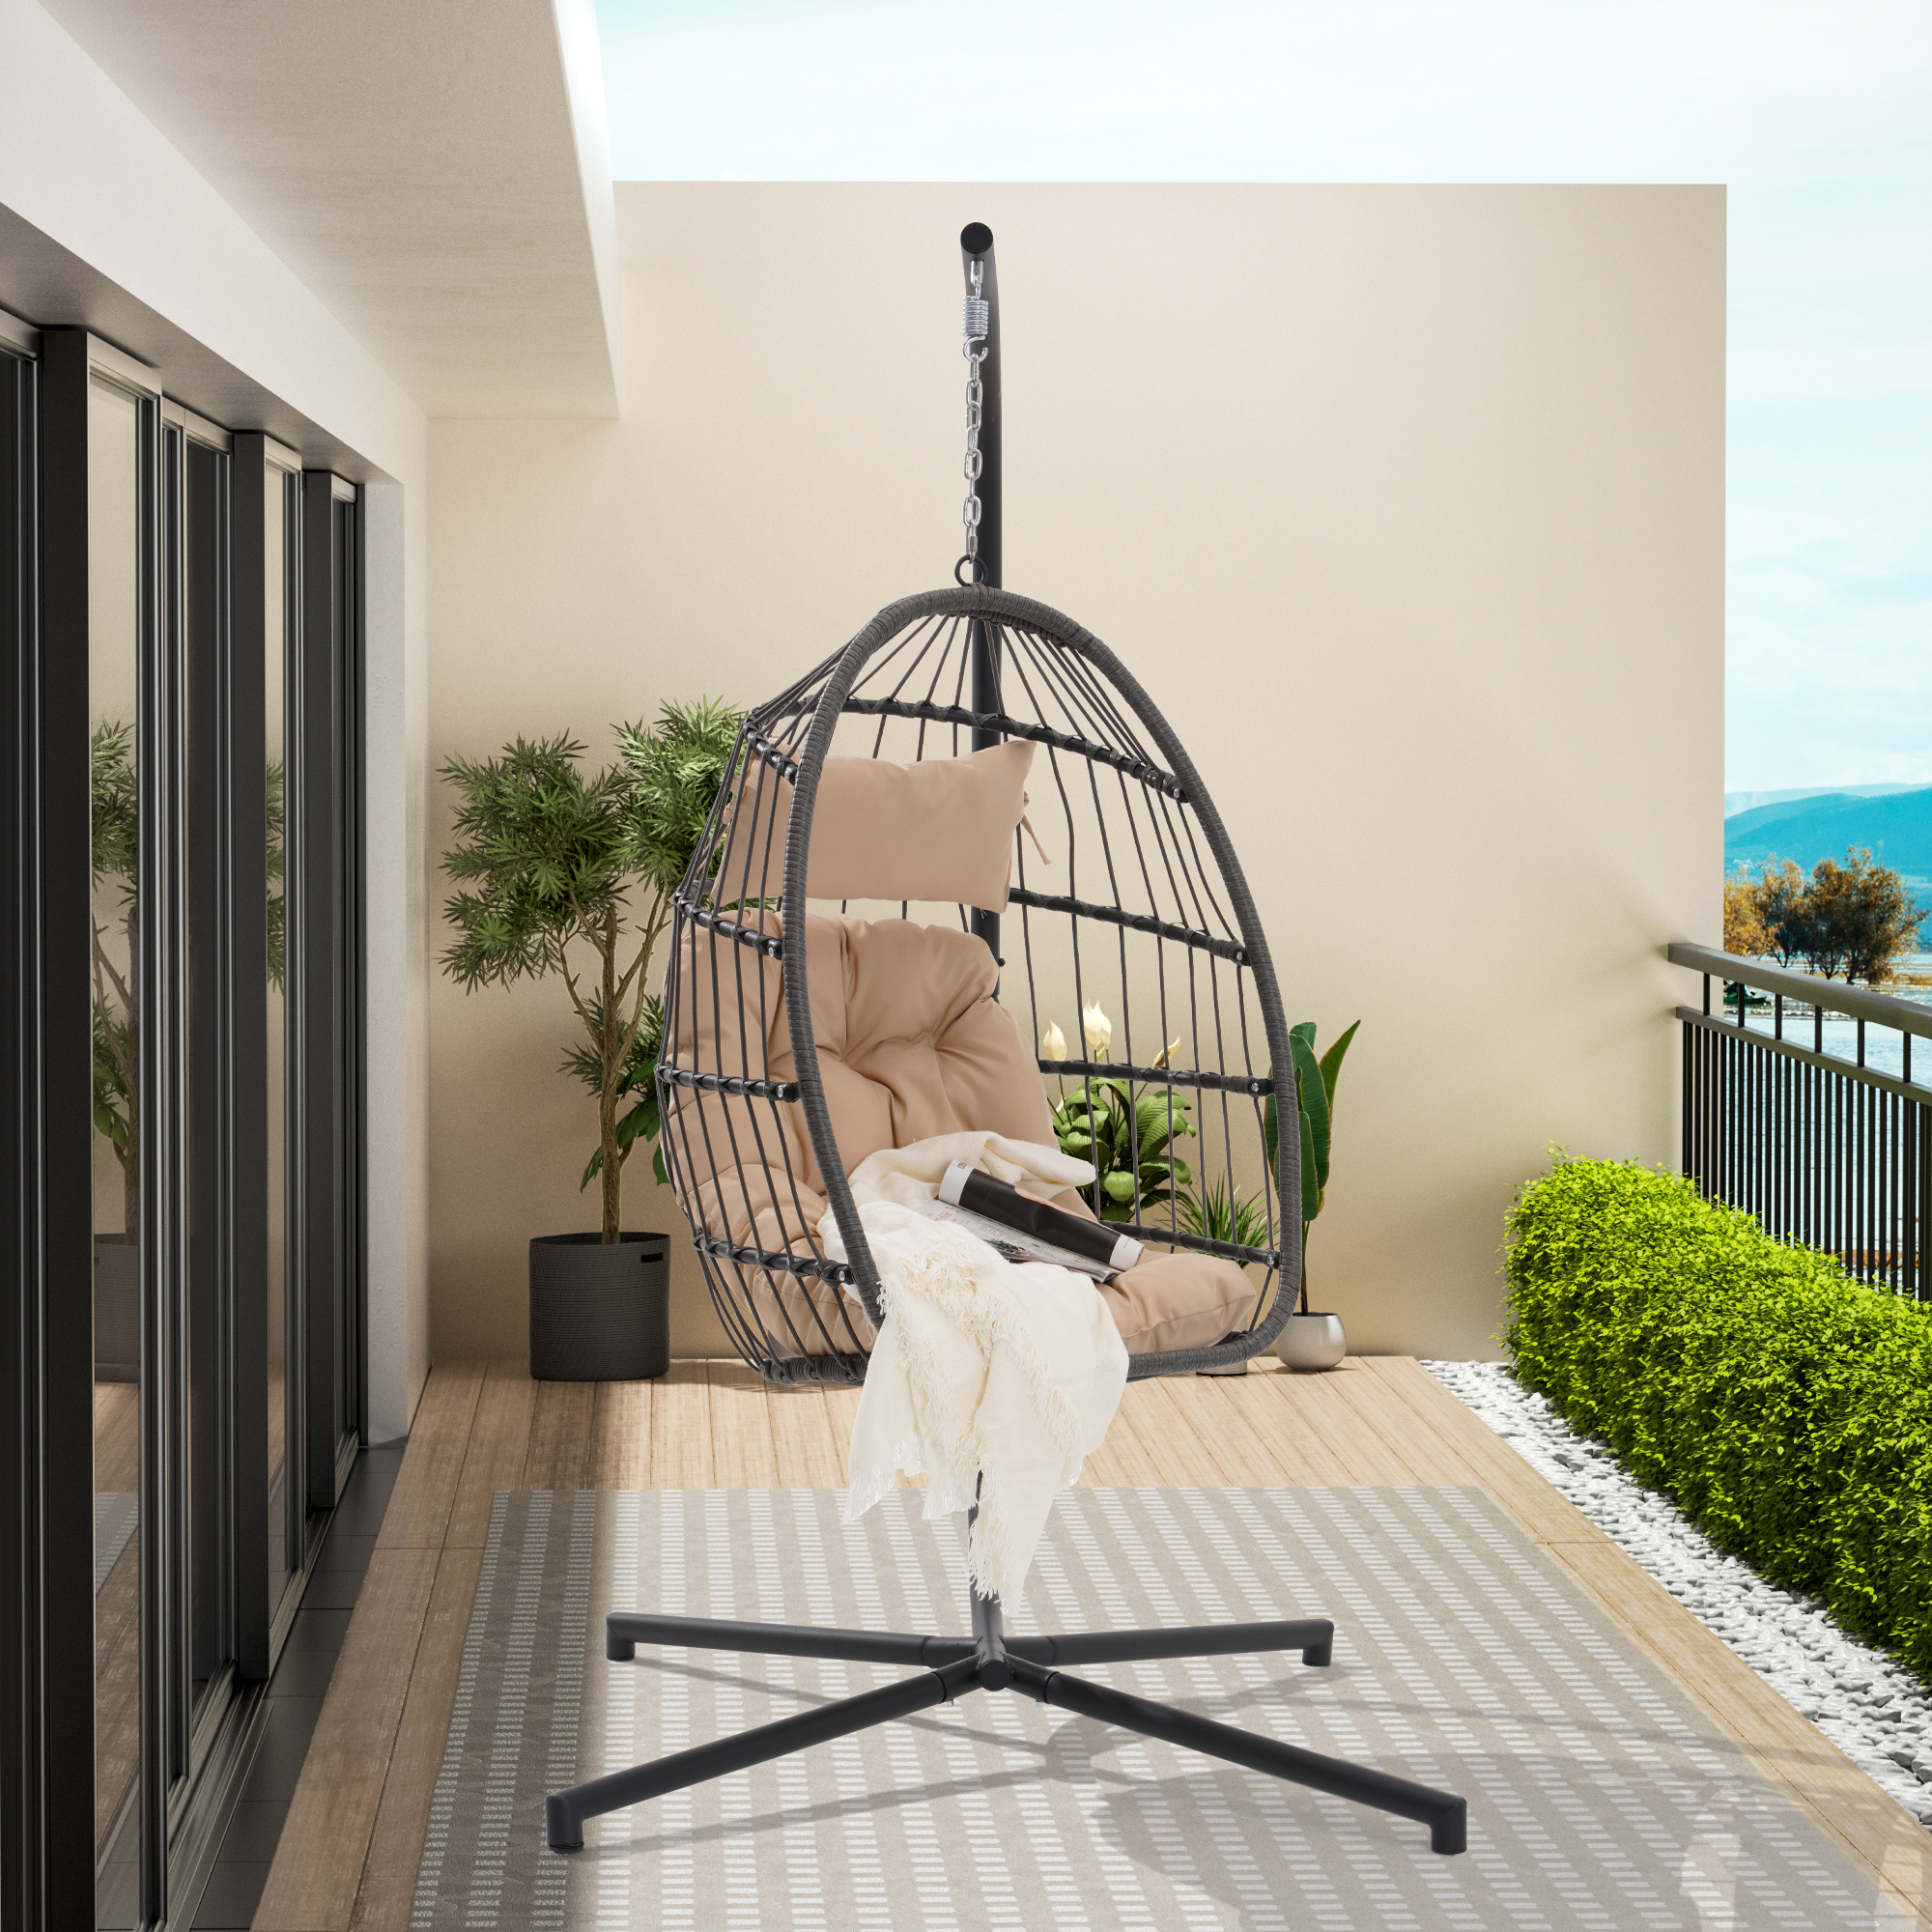 Wicker Swing Chair, BTMWAY Patio Foldable Egg Chair with Stand and Cushions, Outdoor All-weather Rattan Hammock Egg Chair Folding Hanging Chair for Balcony Backyard Garden Poolside, Holds 380lb, Beige - image 3 of 4